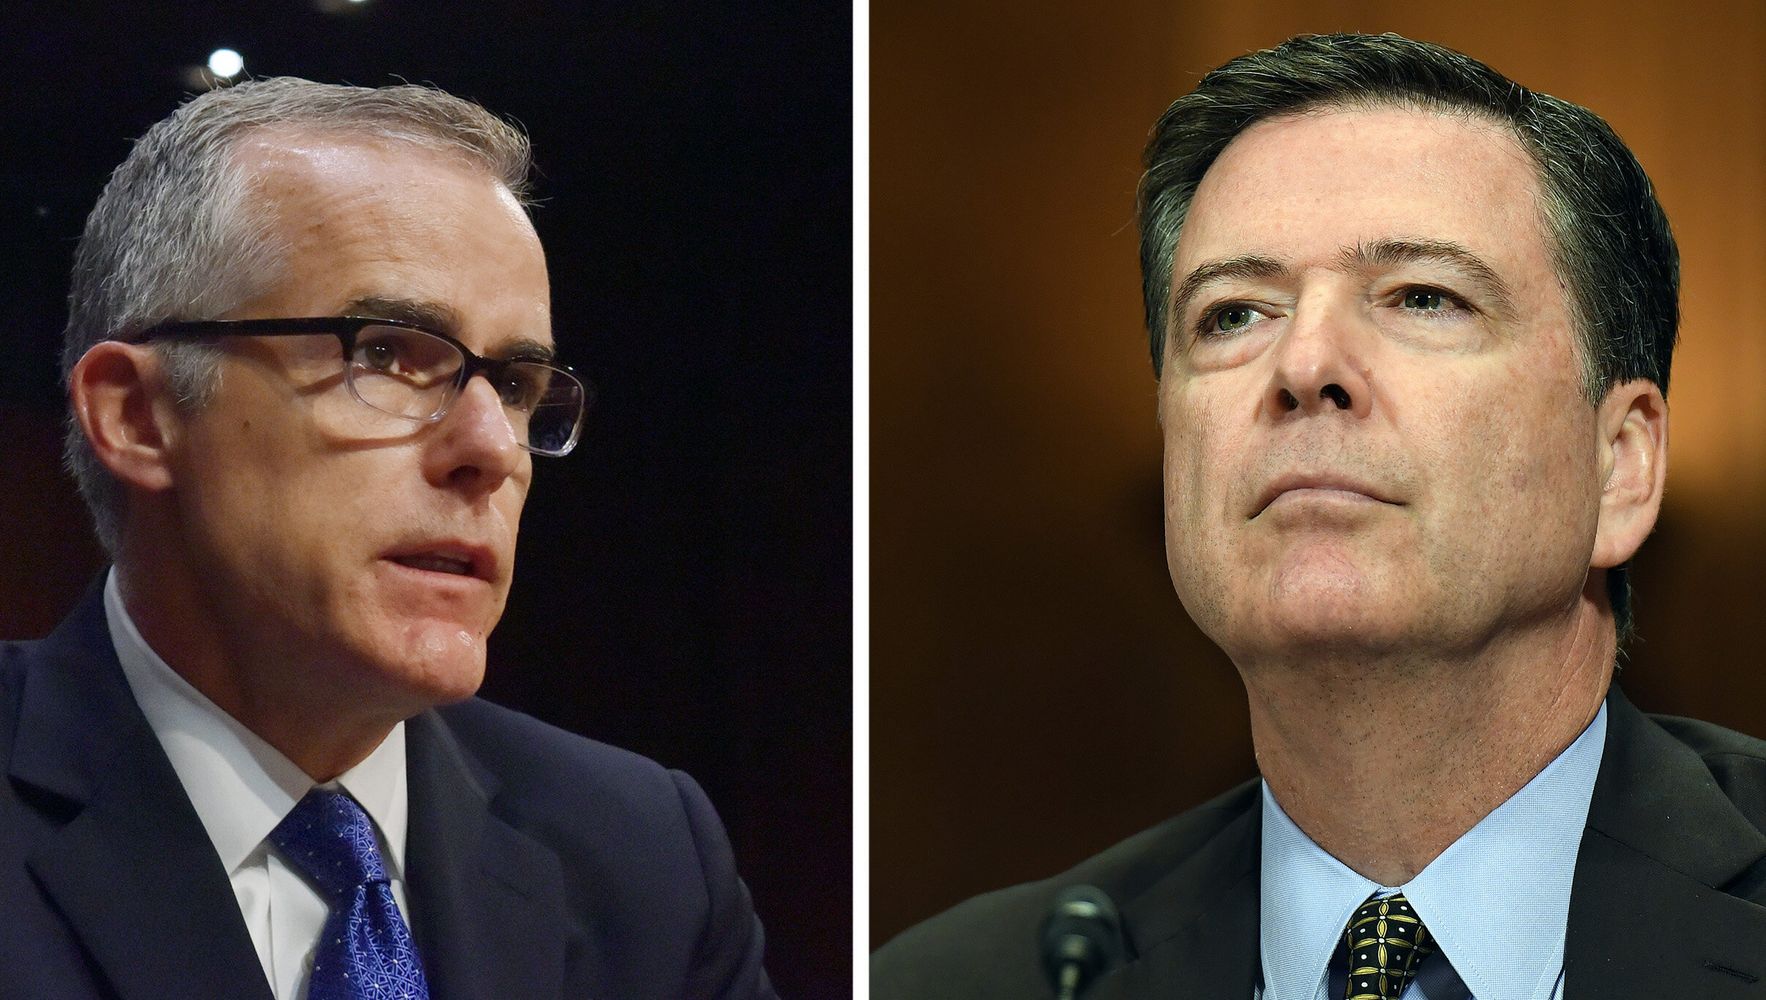 IRS Watchdog To Investigate Why Comey, McCabe Both Chosen For Rare, Invasive Audit